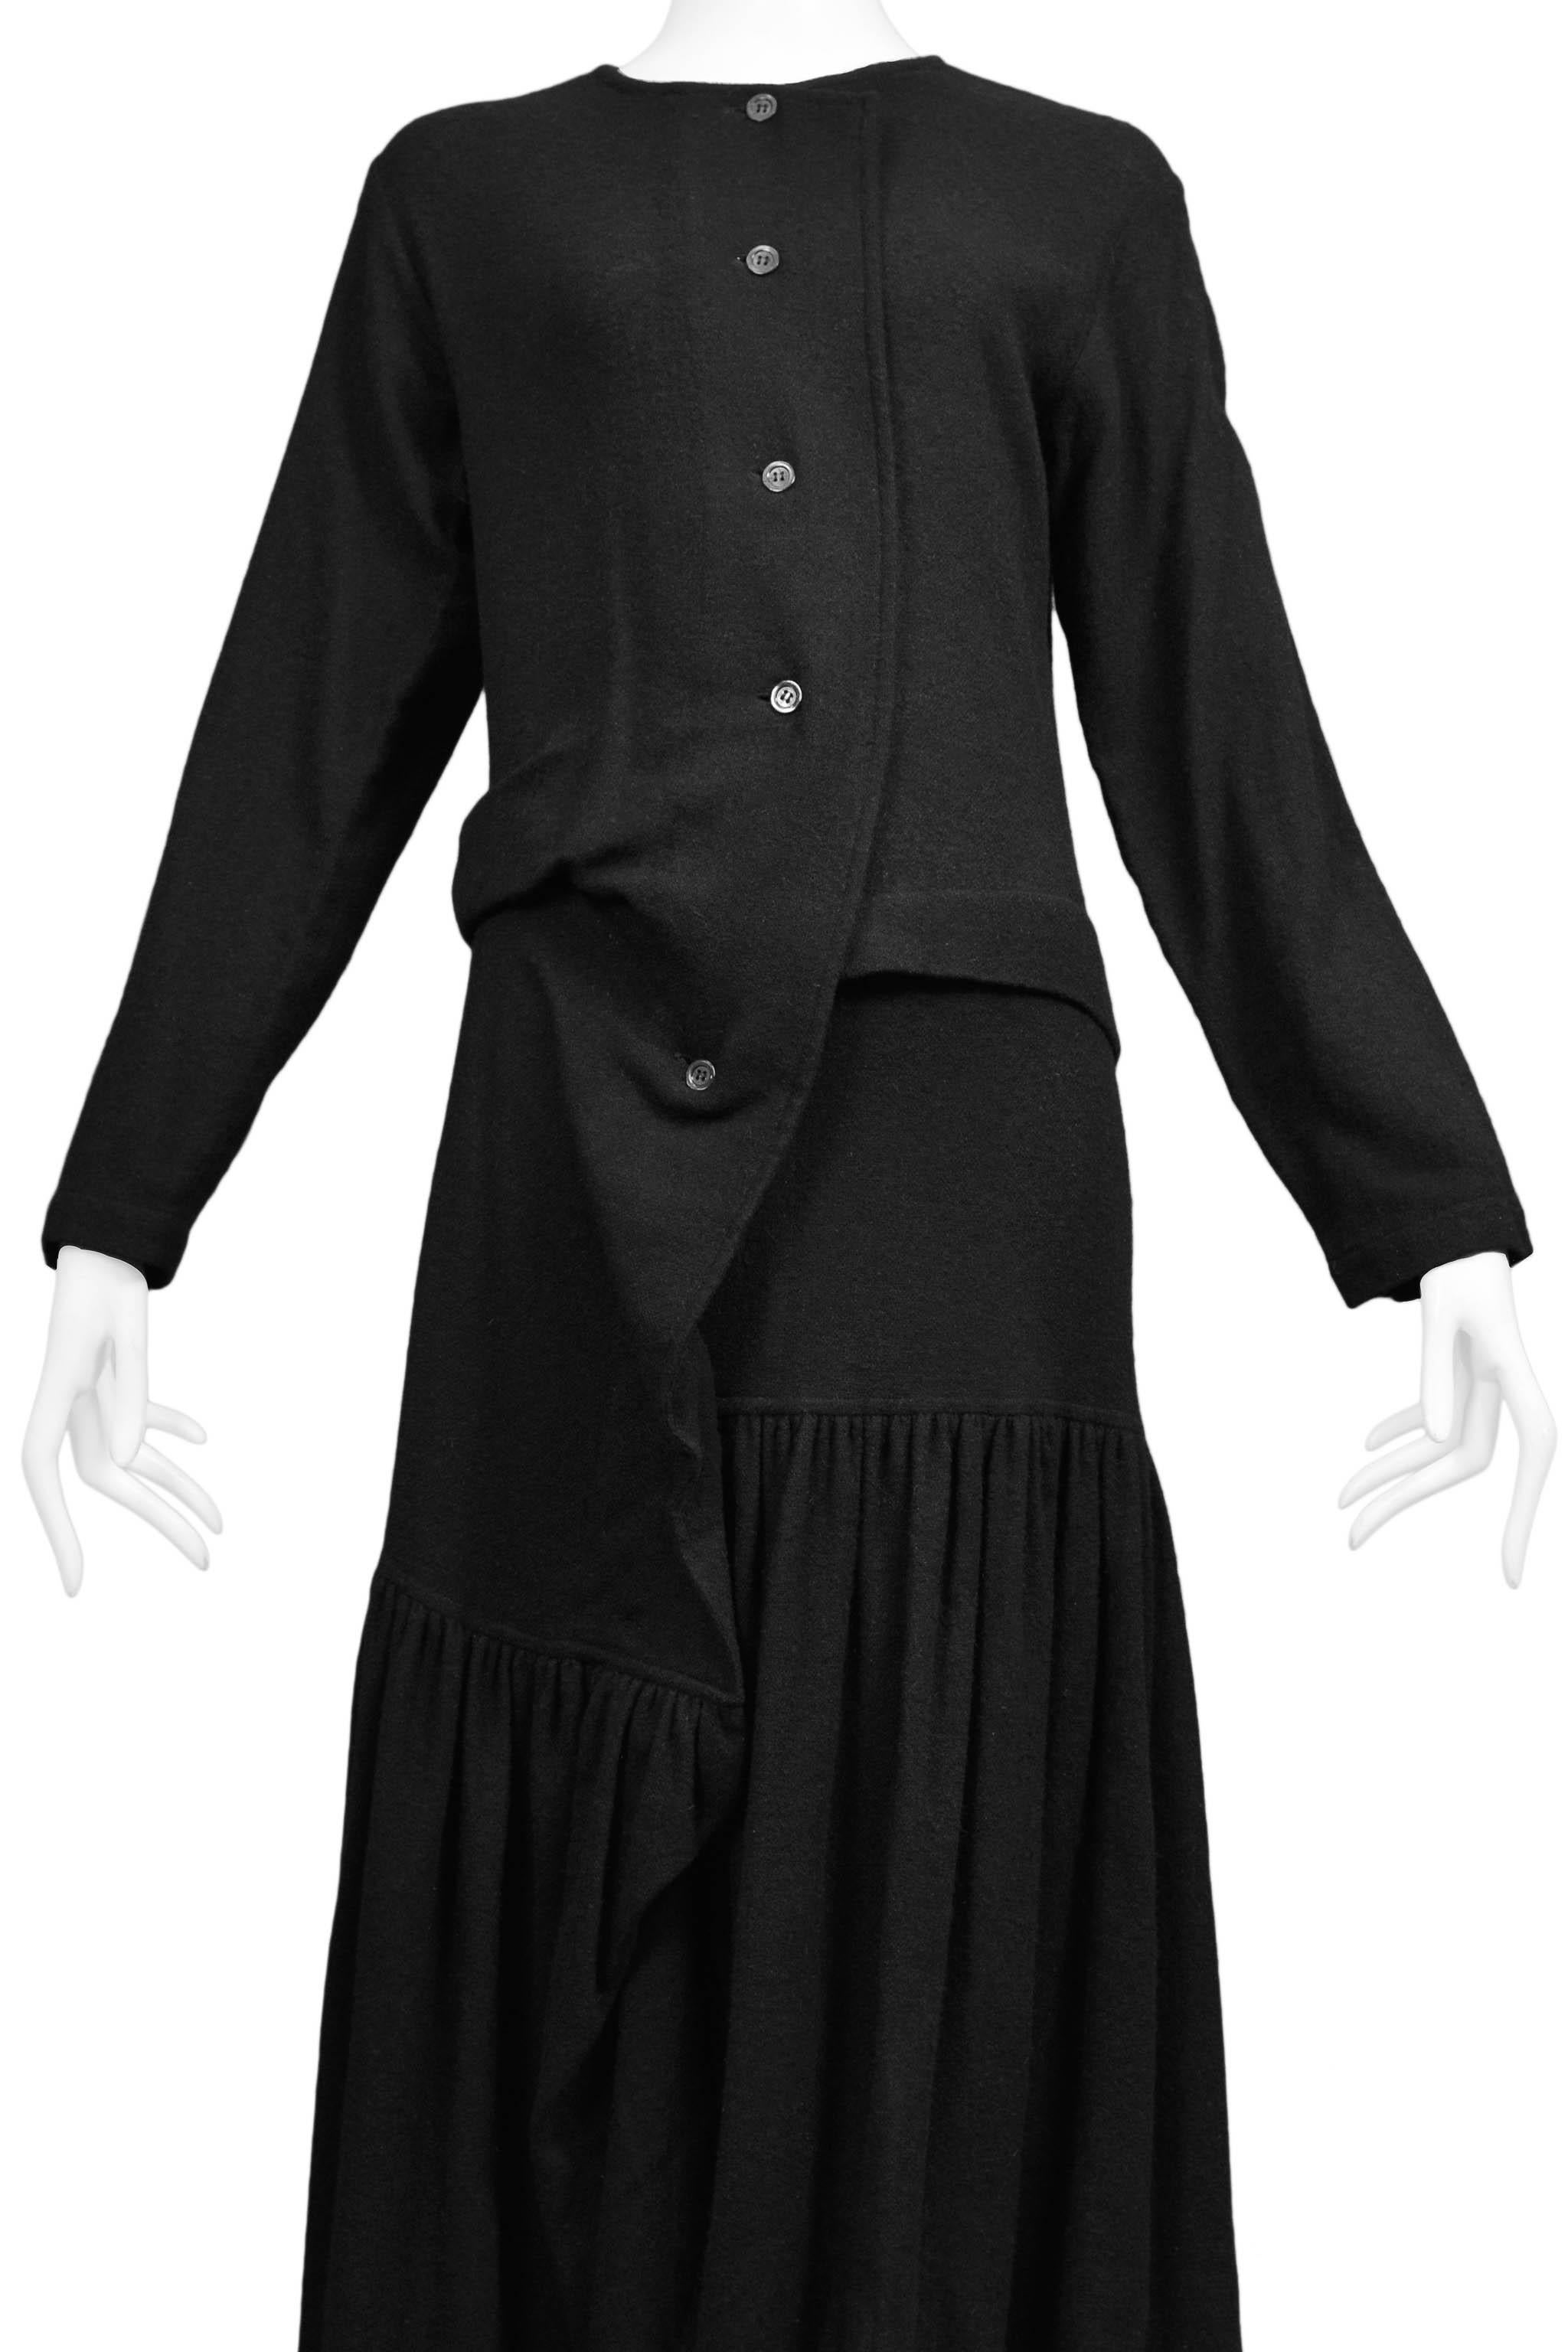 Comme Des Garcons Early Black Knit Cardigan Sweater Dress 1